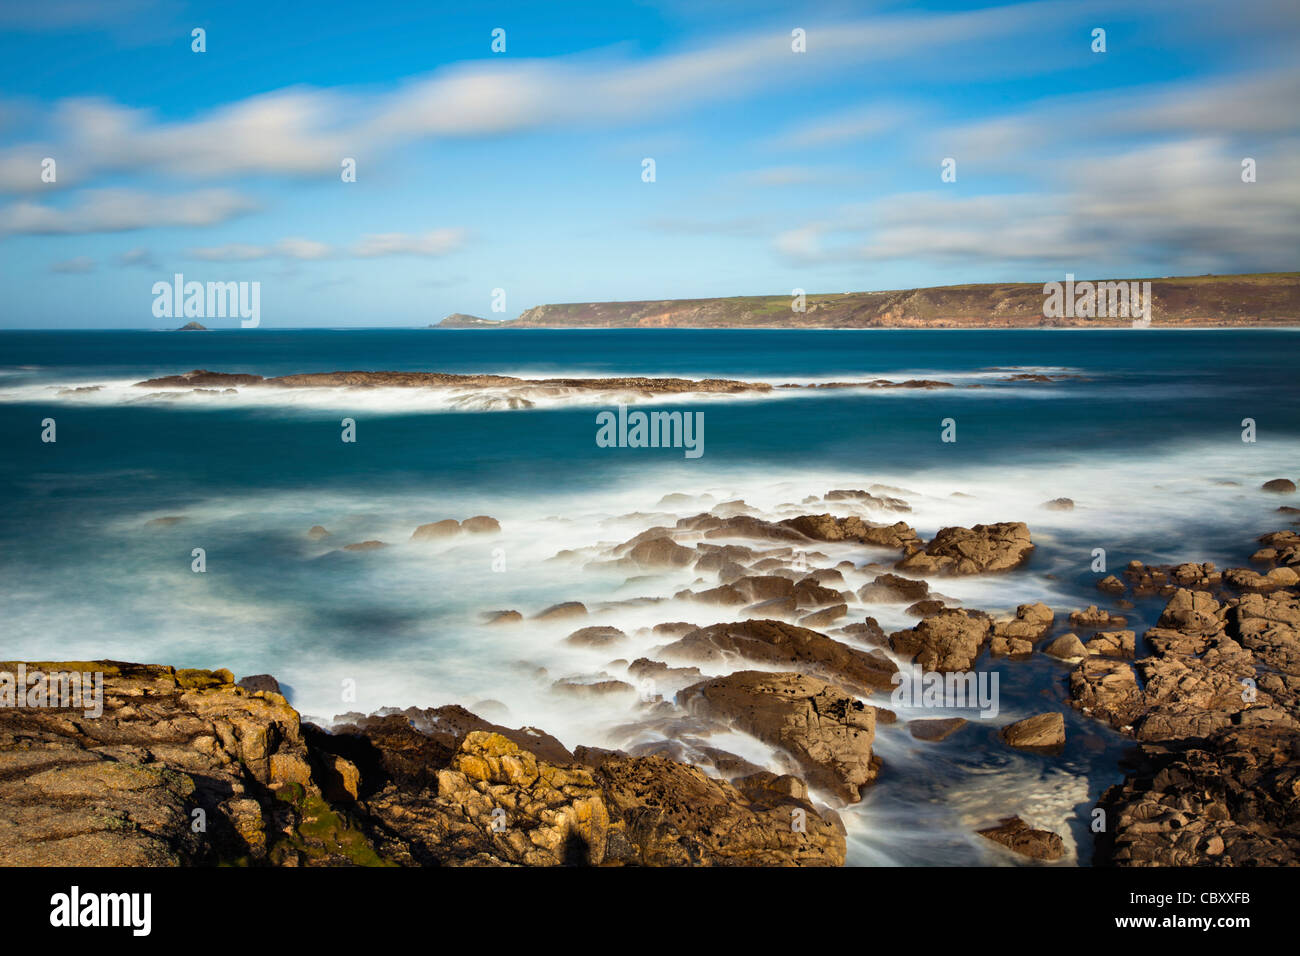 The view north from rocks near Sennen Cove towards Cape Cornwall.  Captured using a long shutter speed. Stock Photo